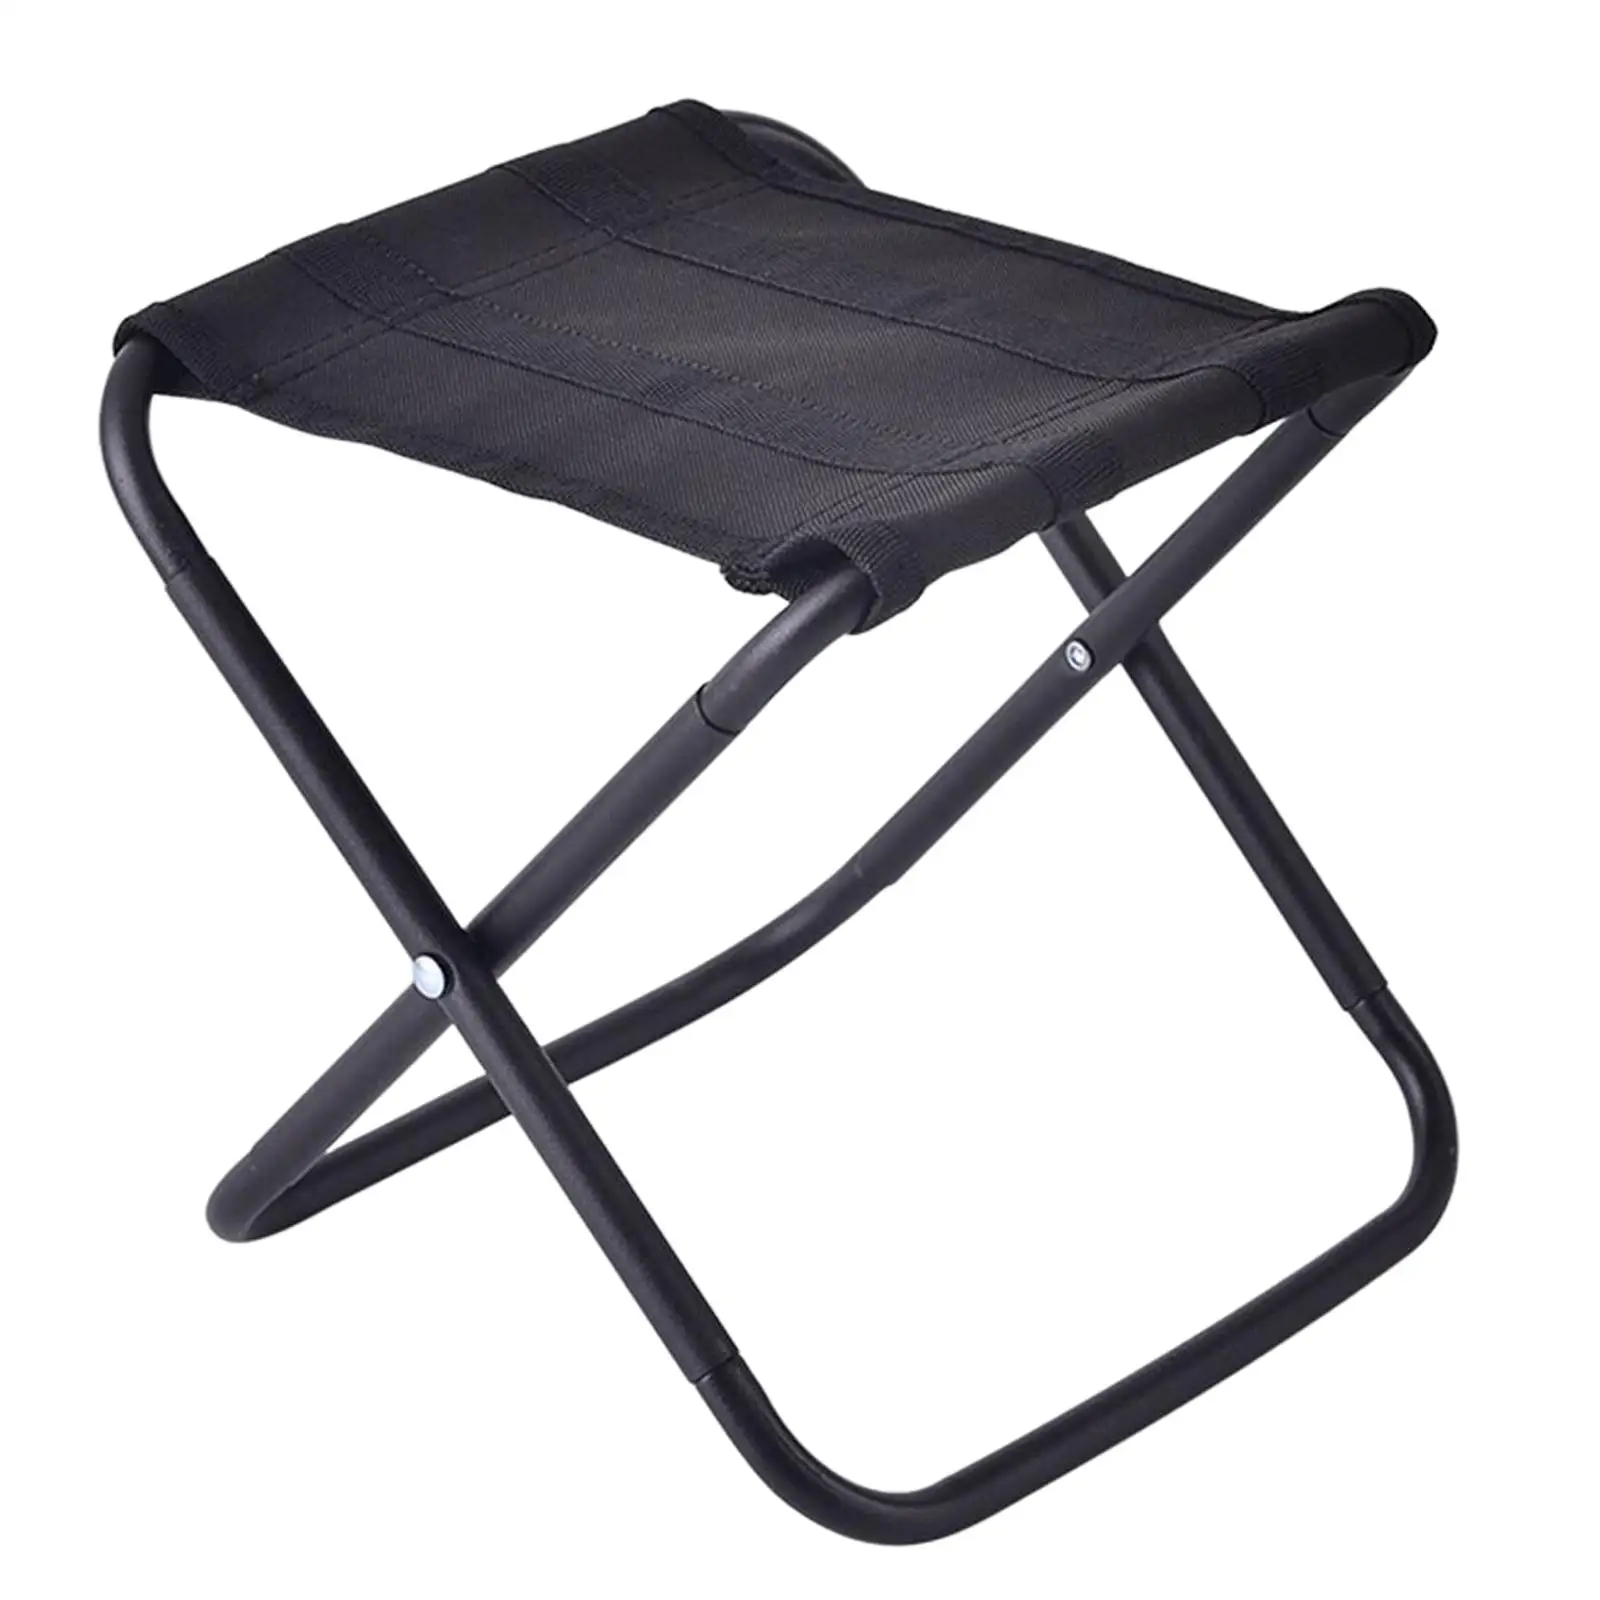 Adult Camping Stool Aluminum Alloy Collapsible Chair Footrest Compact Seat for Fishing Backpacking Lounge Walking Hiking Travel